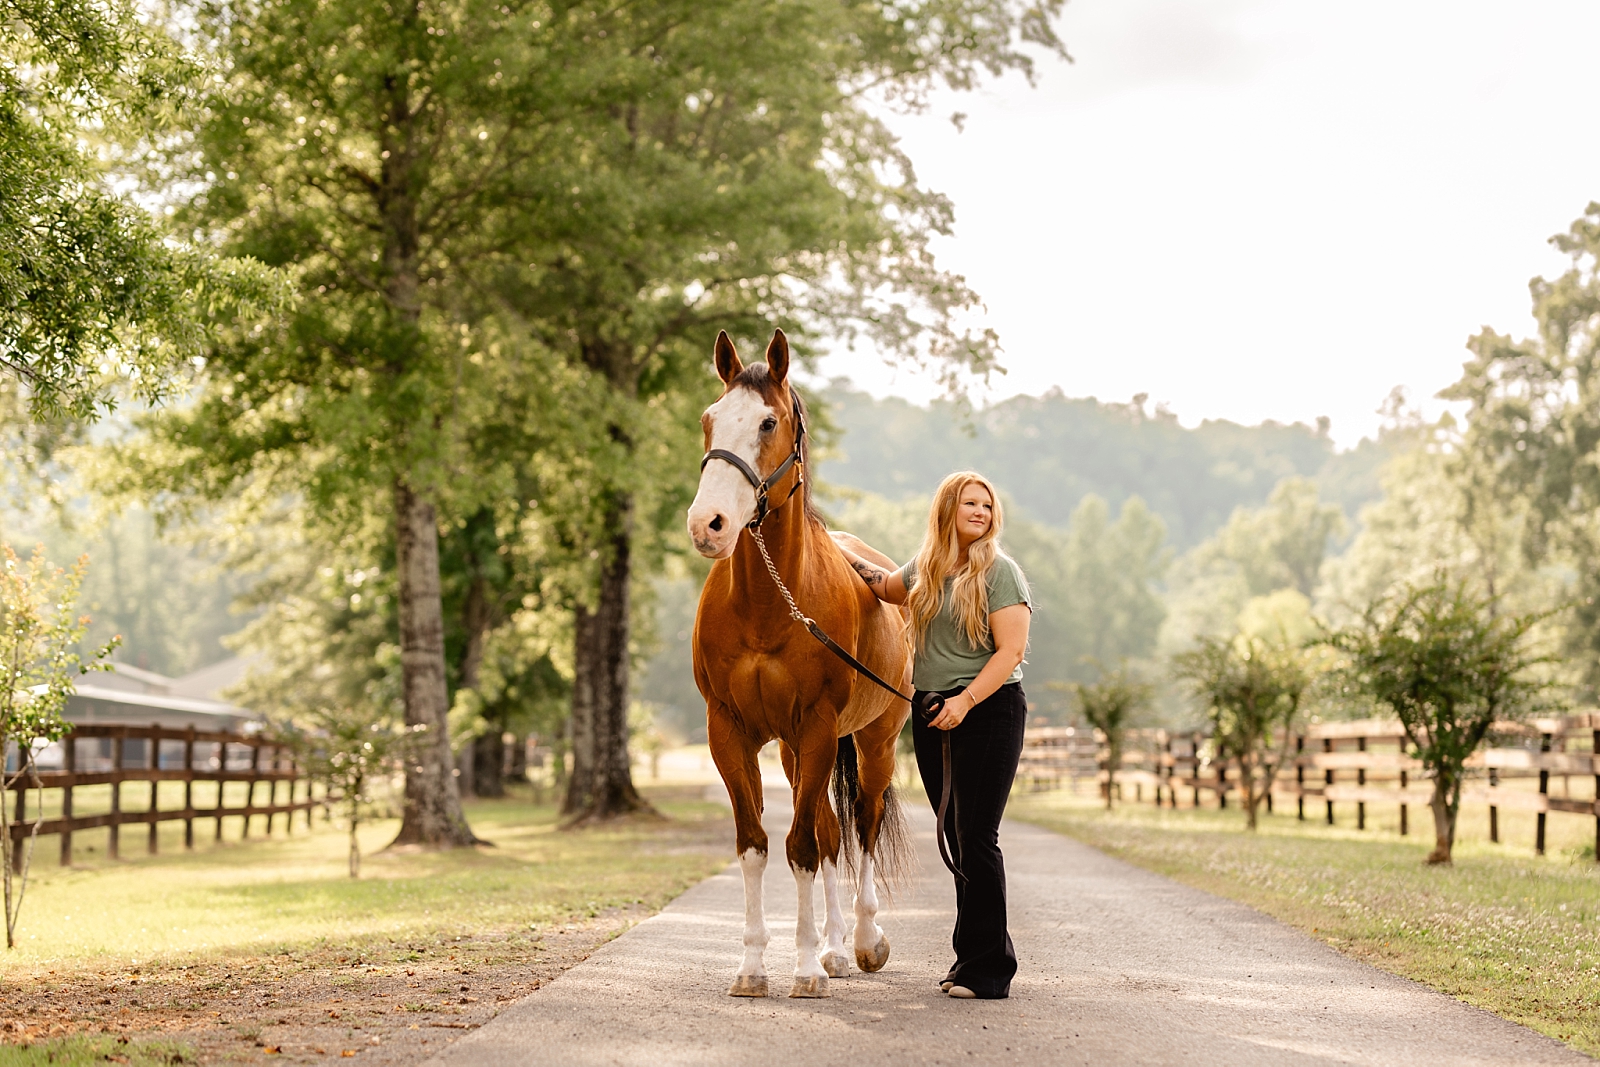 Equestrian photographer in Alabama. Woman with her first horse with the Alabama mountains in the background.